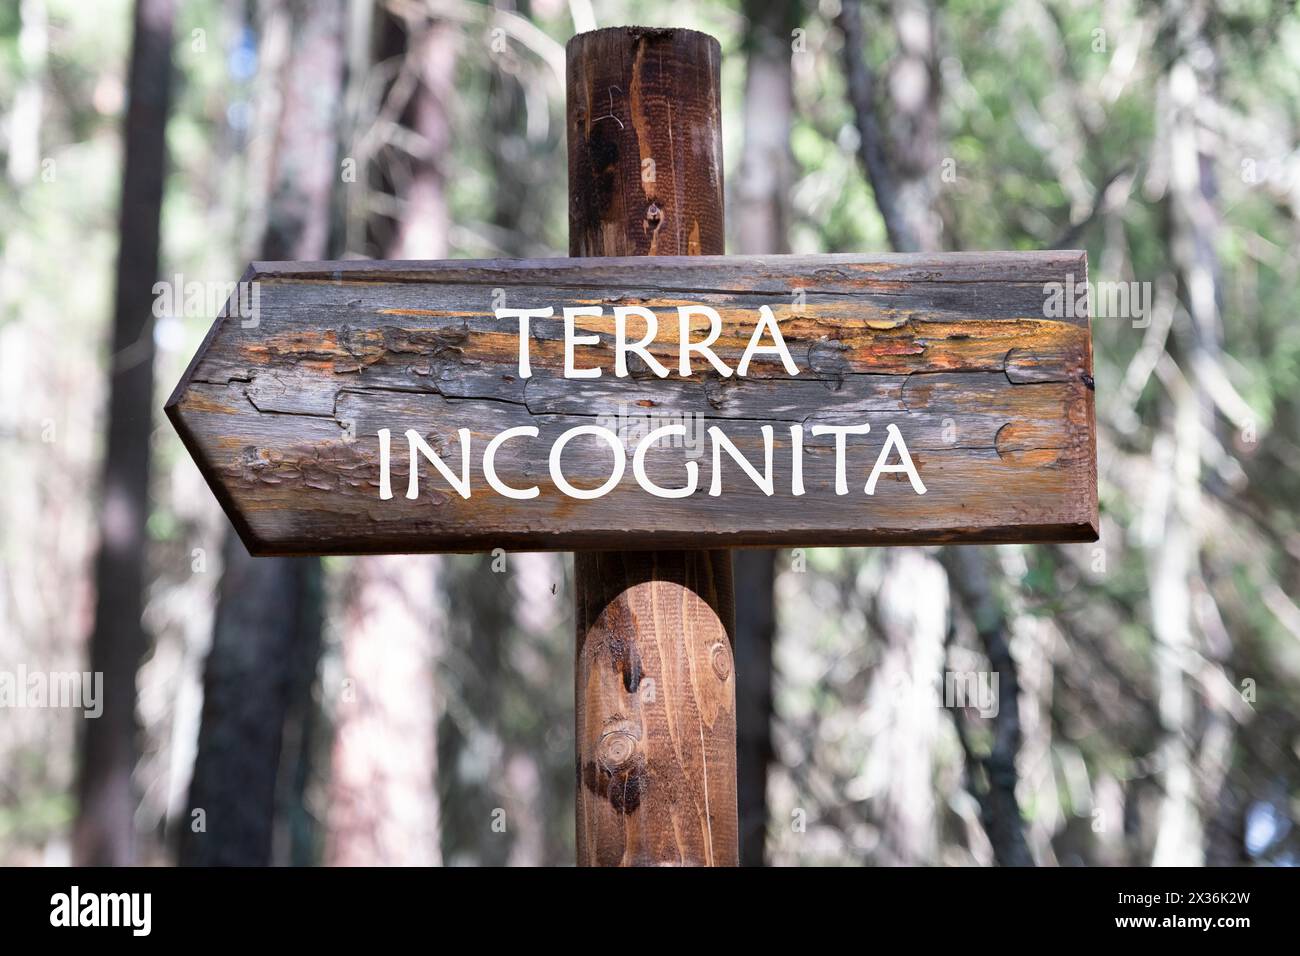 Terra incognita the phrase means unknown land, inscription on the wooden signpost against the background of the forest Stock Photo